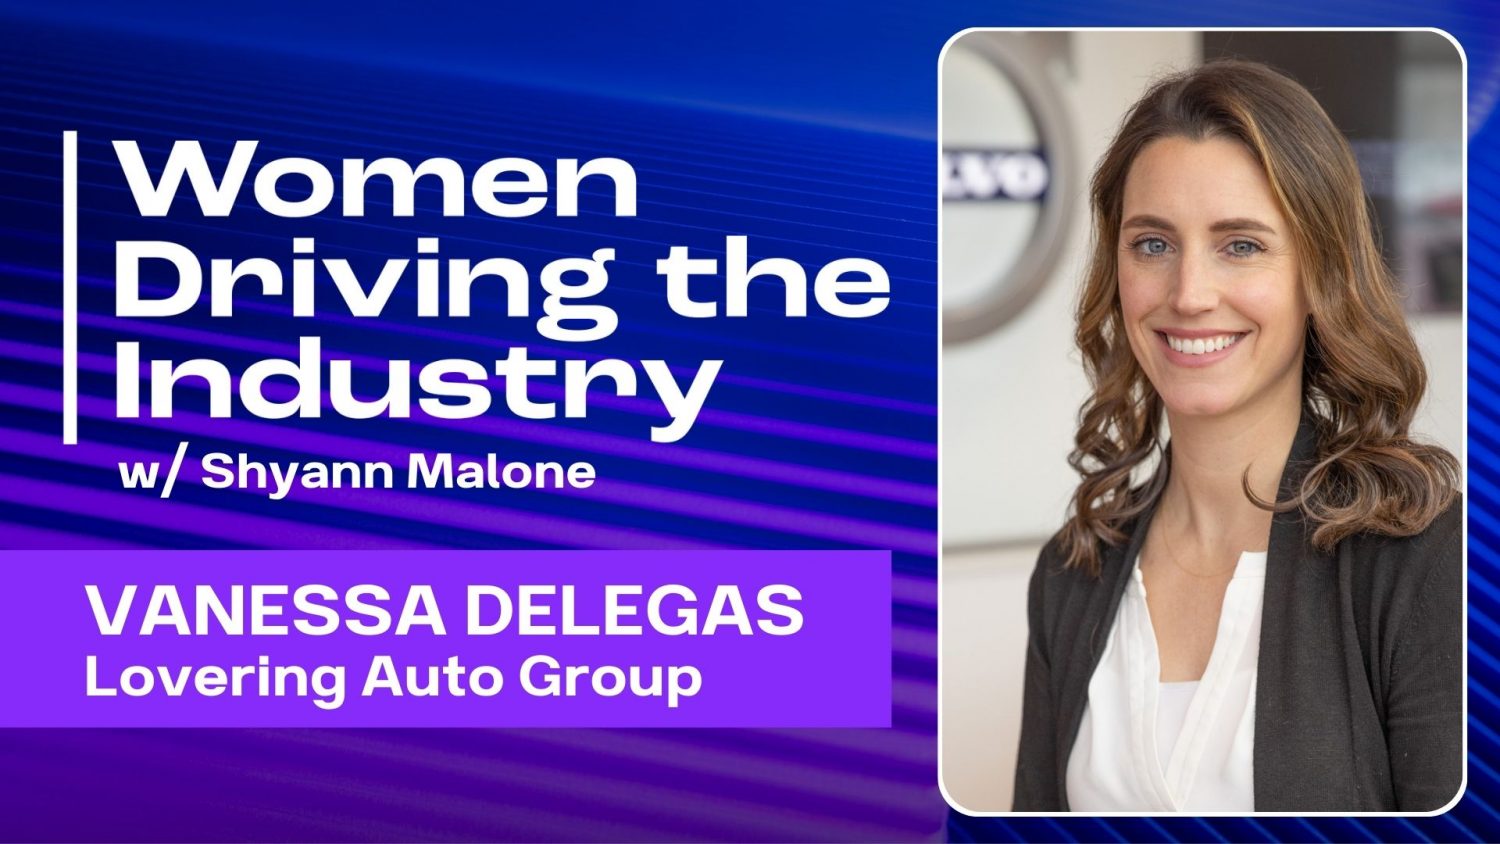 Vanessa Delegas joins Women Driving the Industry to share her insights into the relationship between leadership and representation.